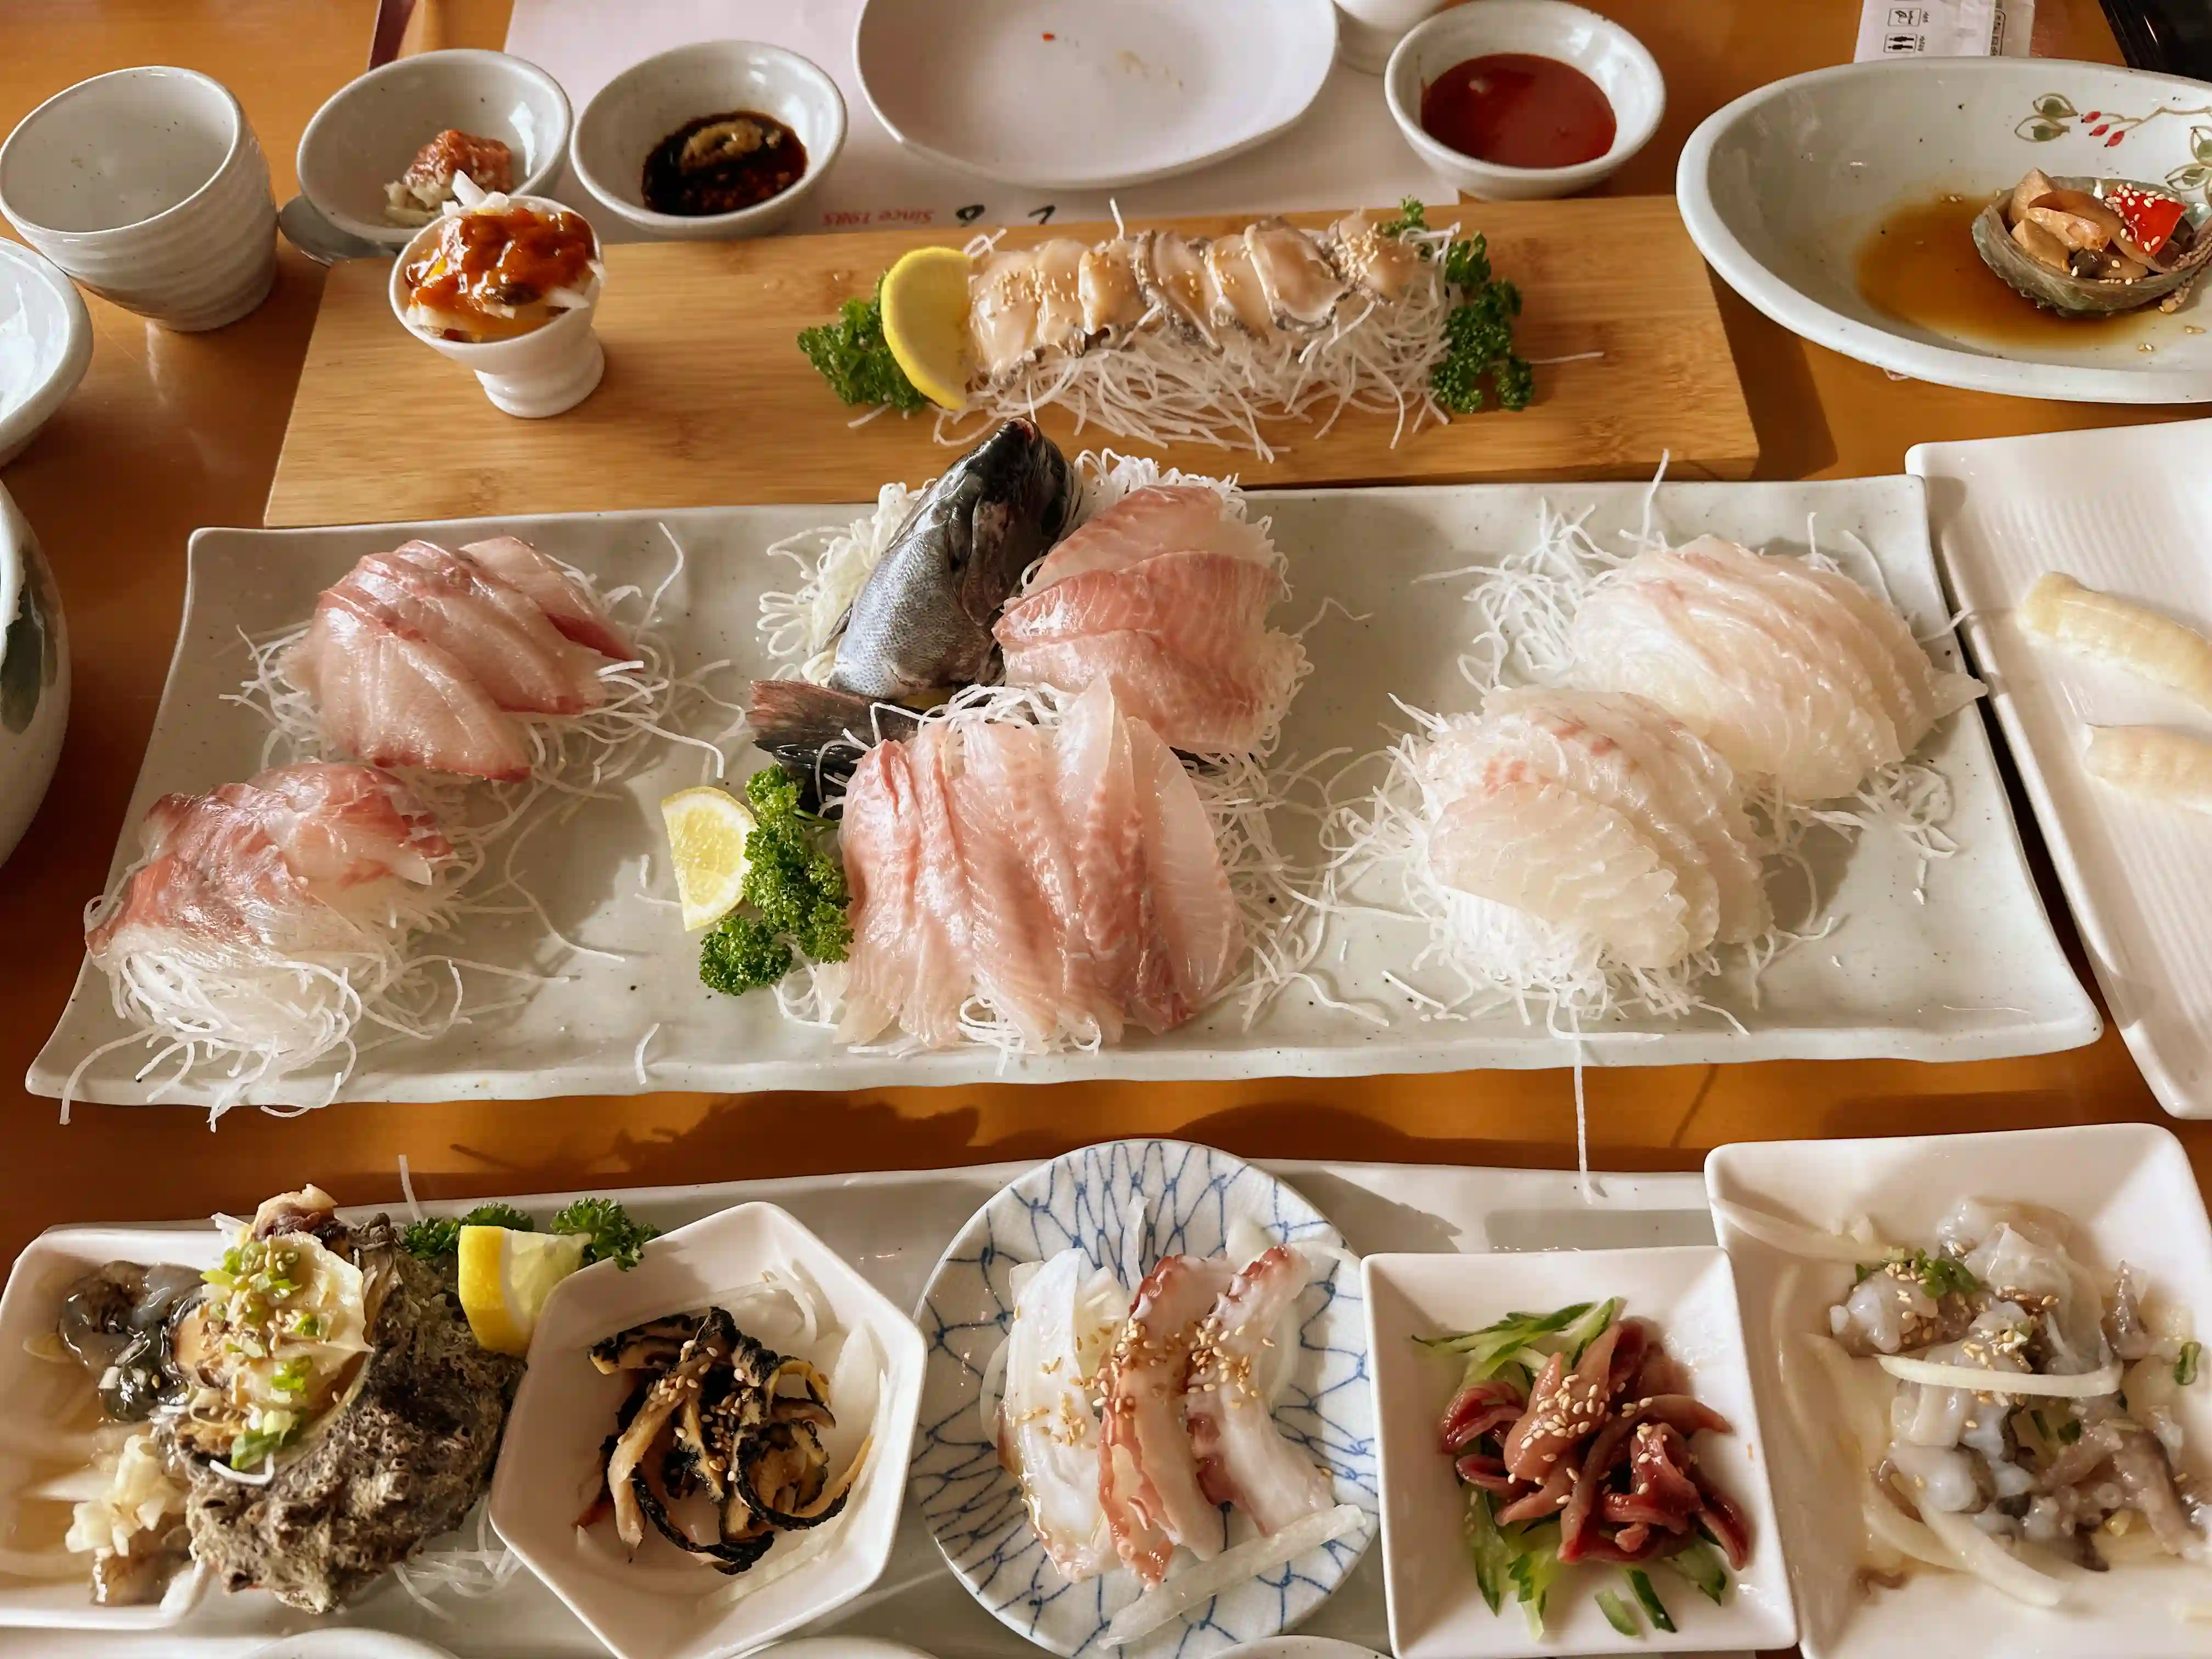 The main course features natural live sashimi. The centerpiece is sweetlips, flanked by yellowtail and flatfish on either side. The texture and freshness of these wild-caught fishes are incomparable.